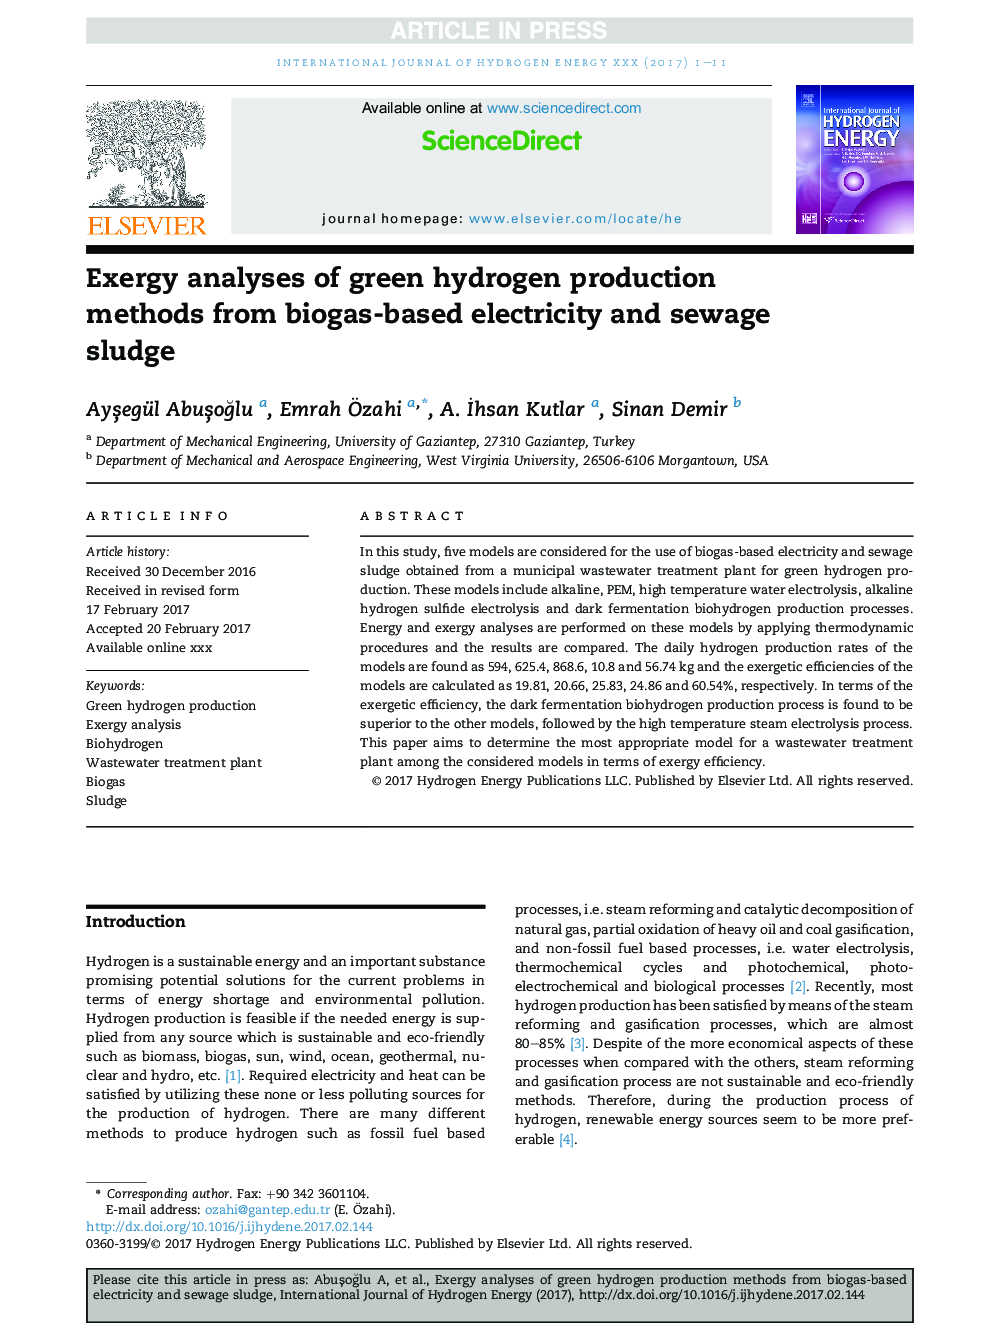 Exergy analyses of green hydrogen production methods from biogas-based electricity and sewage sludge